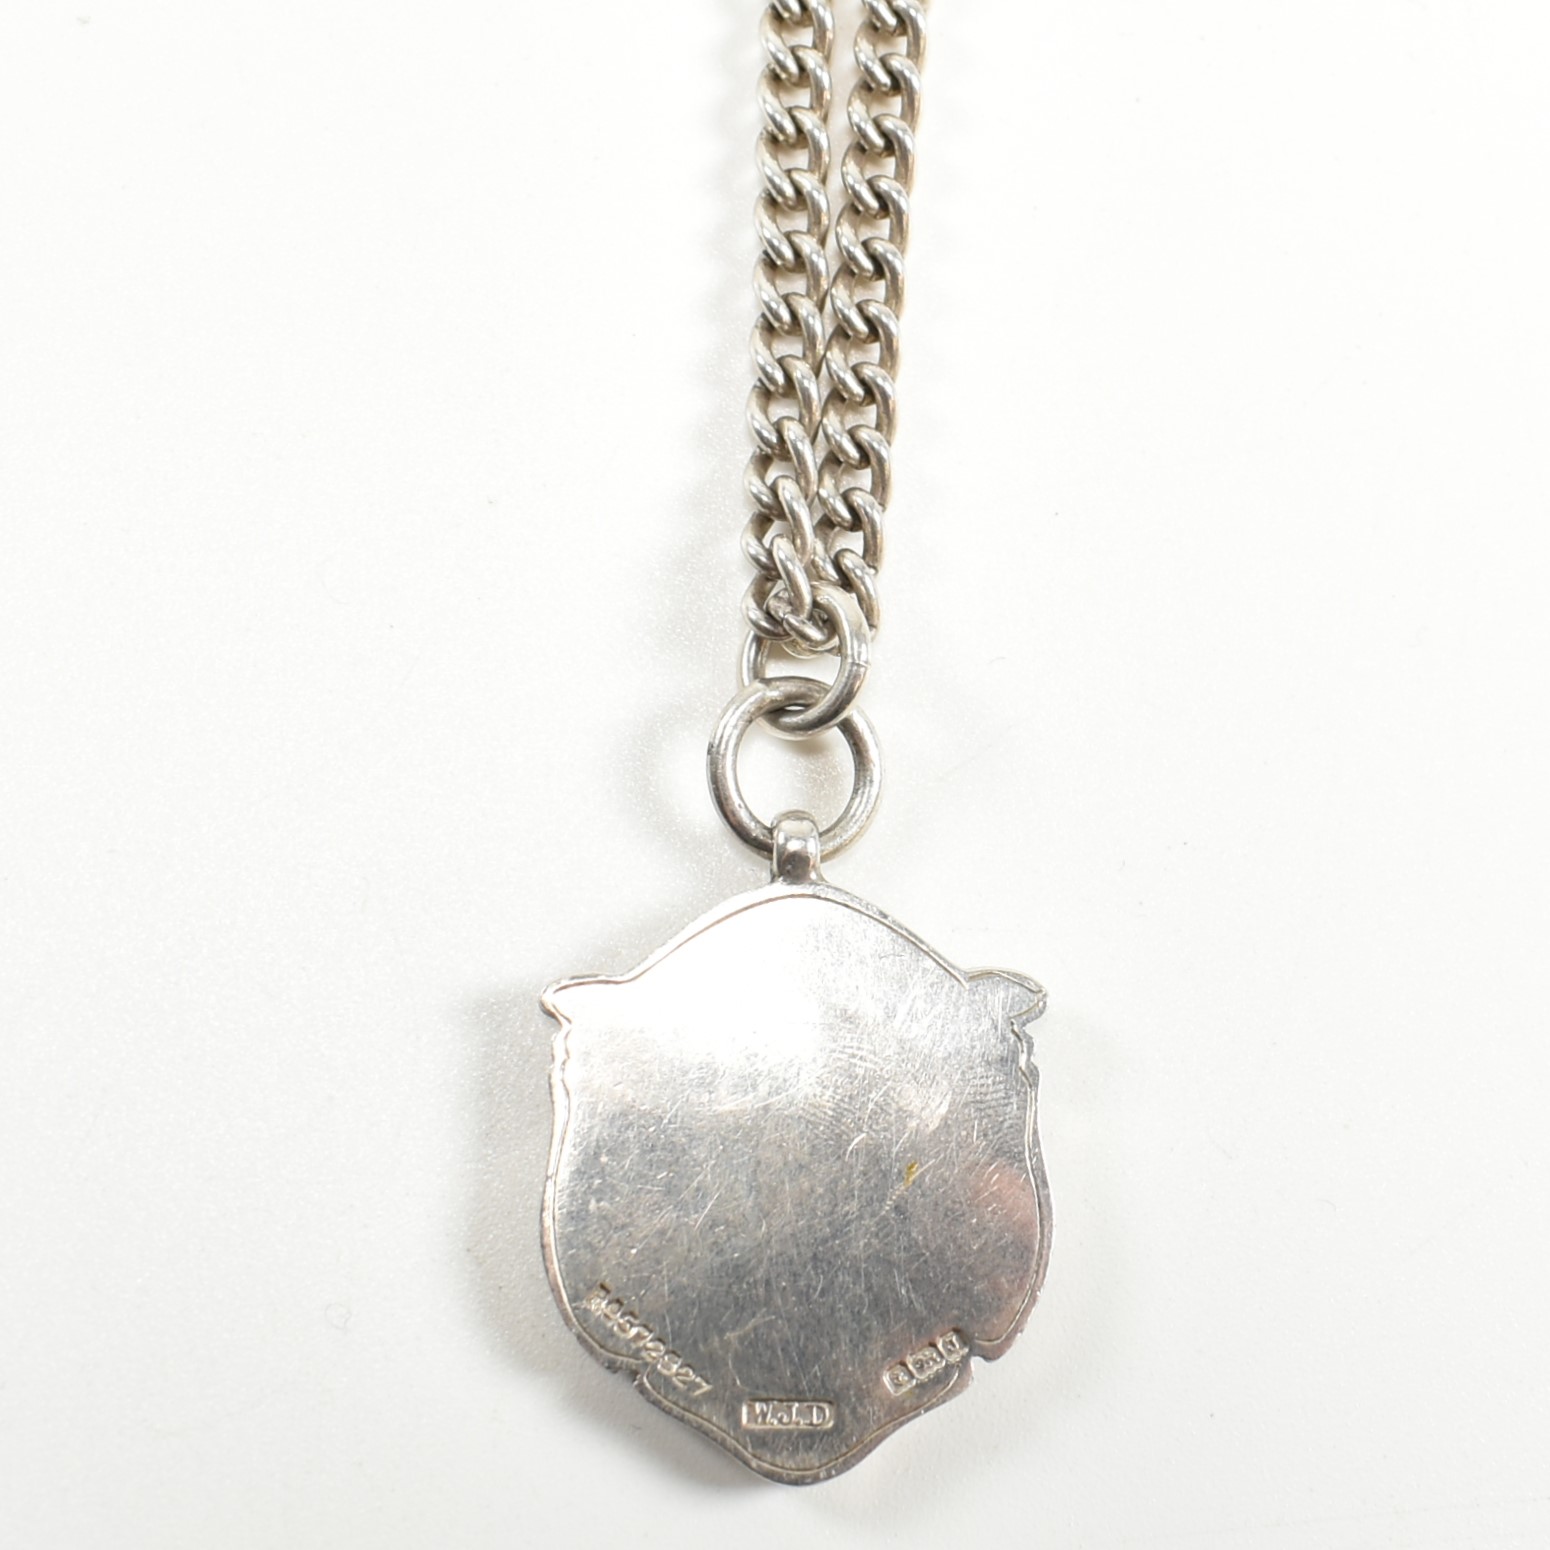 HALLMARKED SILVER ALBERT CHAIN SHIELD FOB ON CURB LINK CHAIN NECKLACE - Image 2 of 6